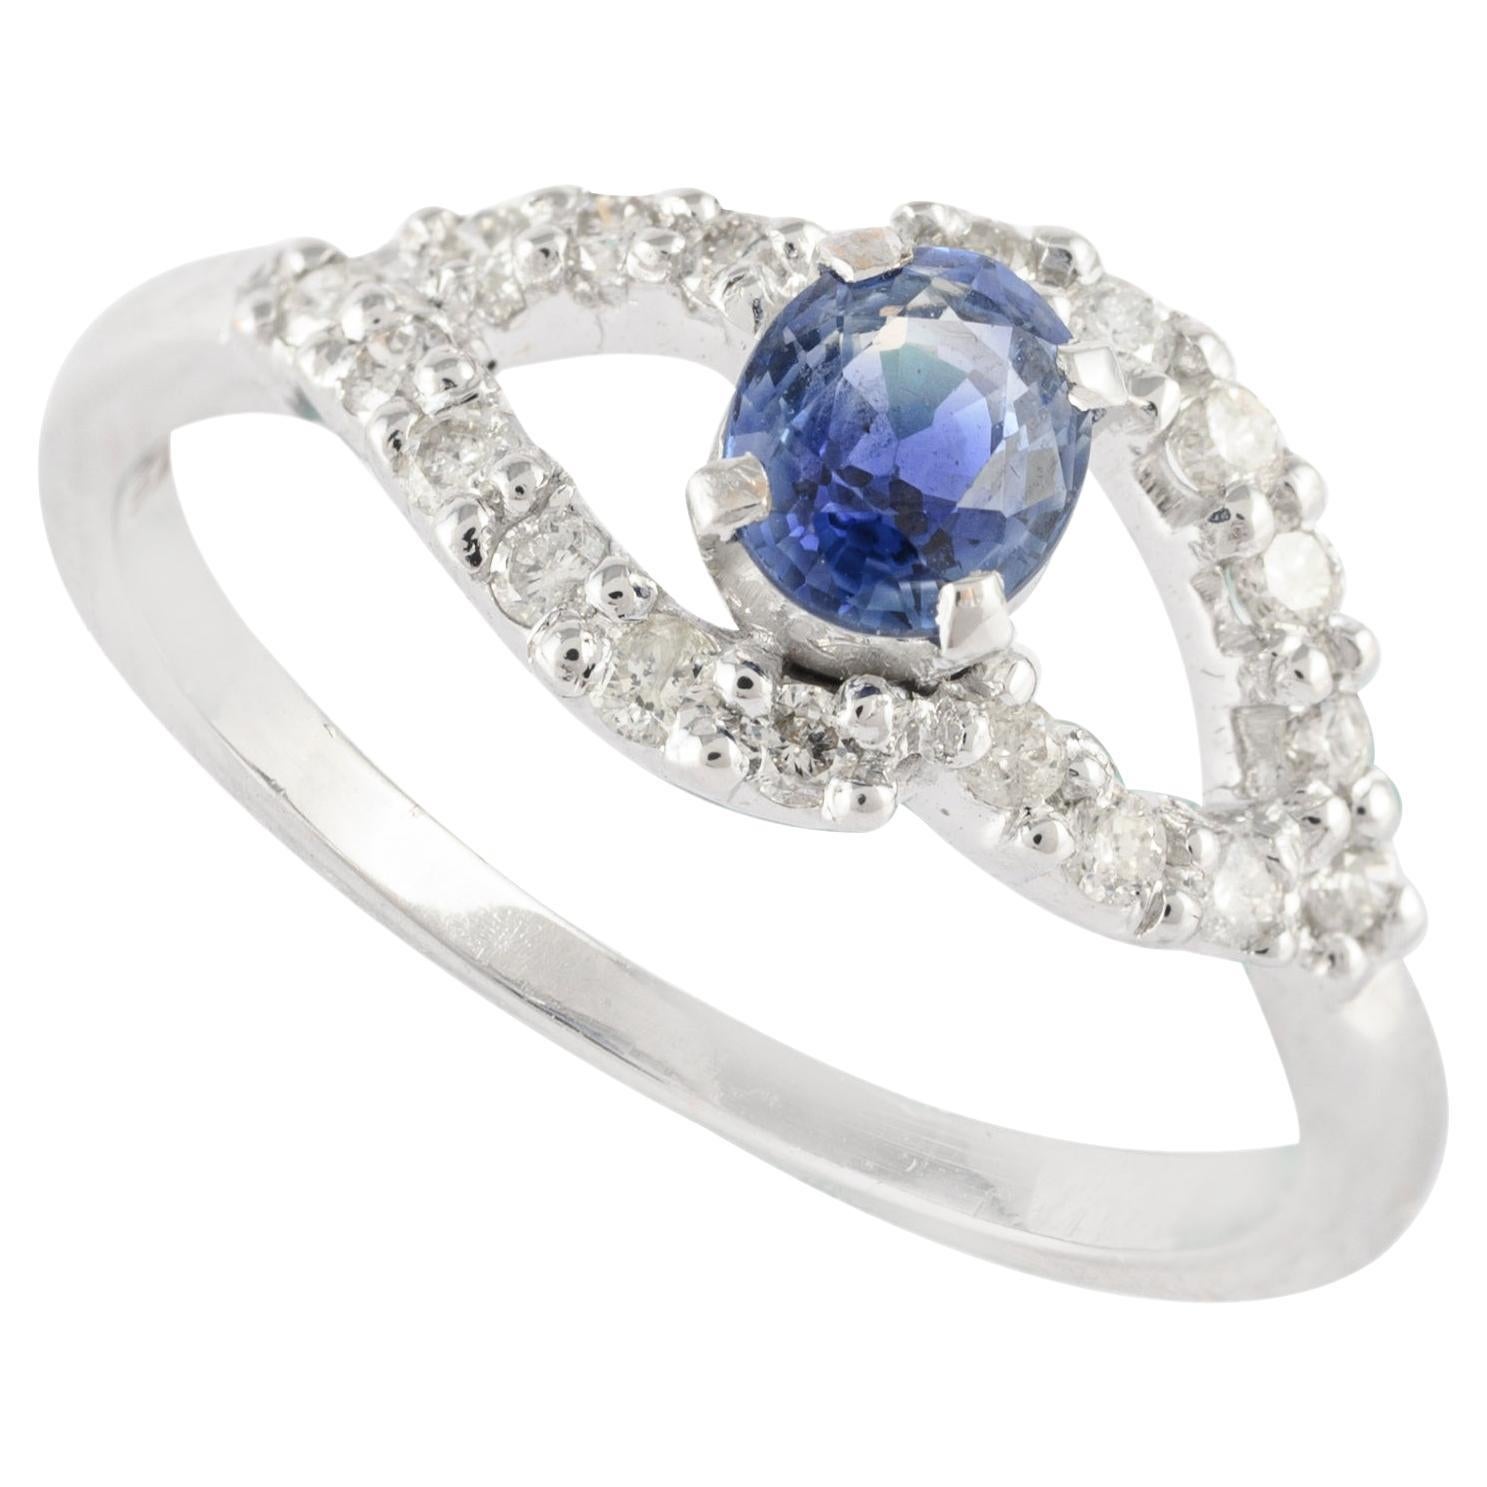 For Sale:  Alluring Blue Sapphire Ring with Diamonds Set in 14K Solid White Gold